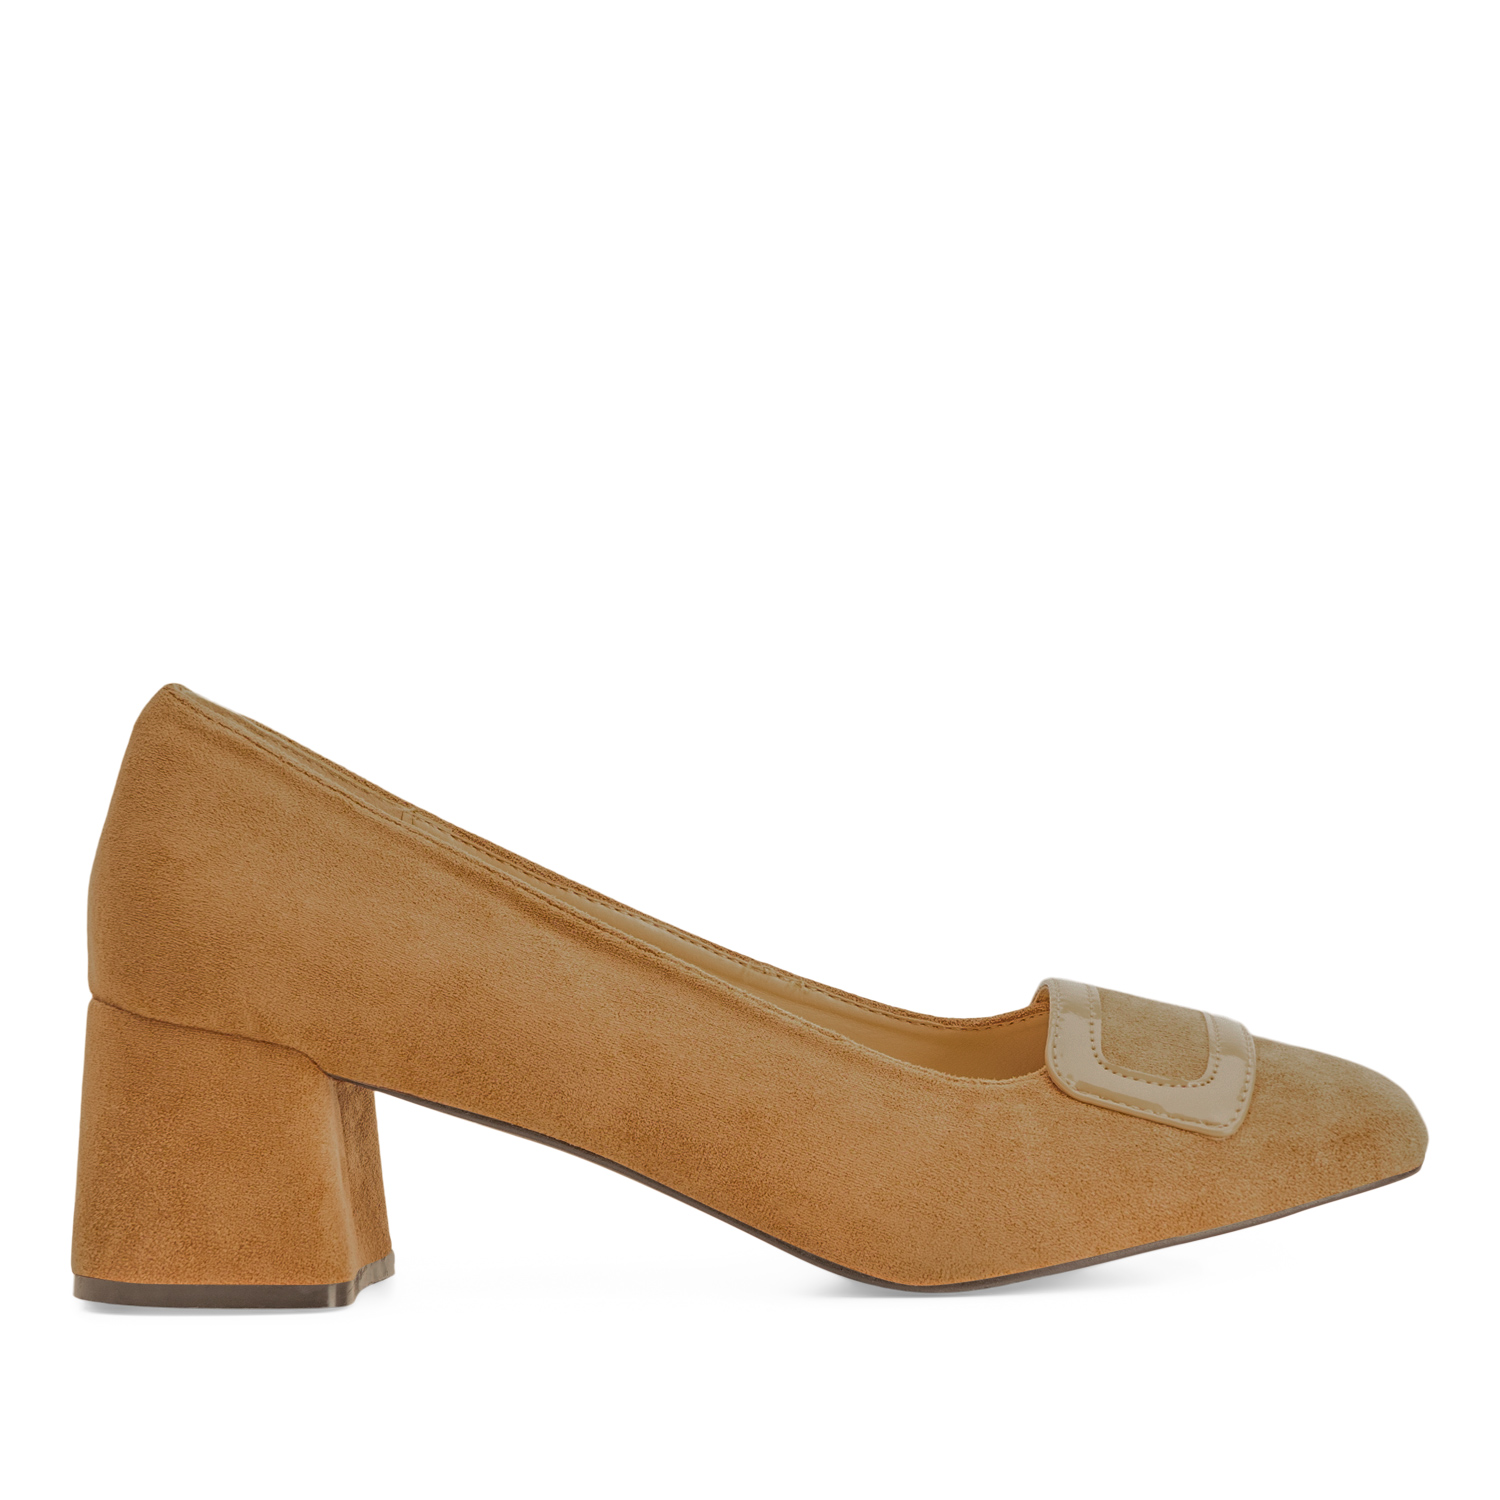 Heeled shoes in beige faux suede 